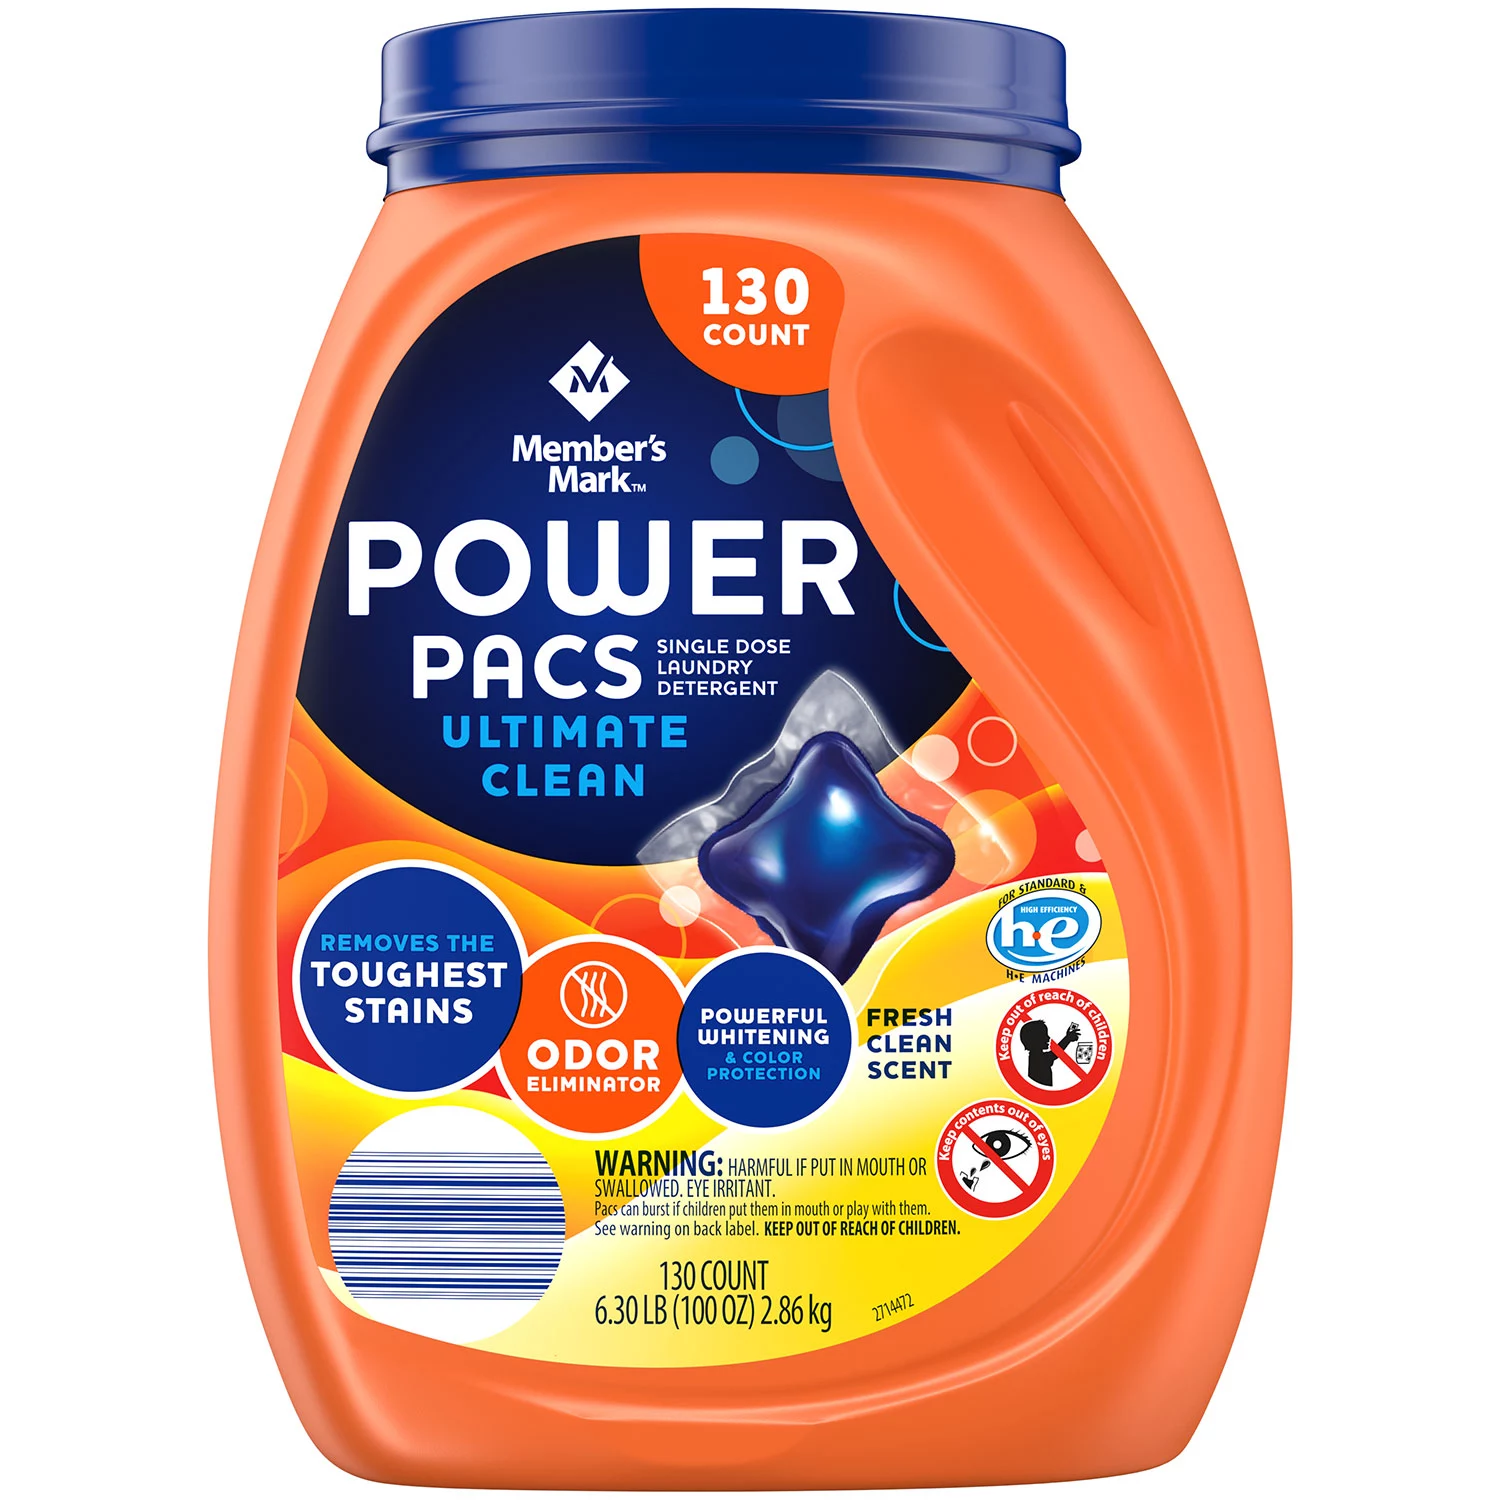 Member’s Mark Ultimate Clean Laundry Detergent Power Pacs (130 loads)